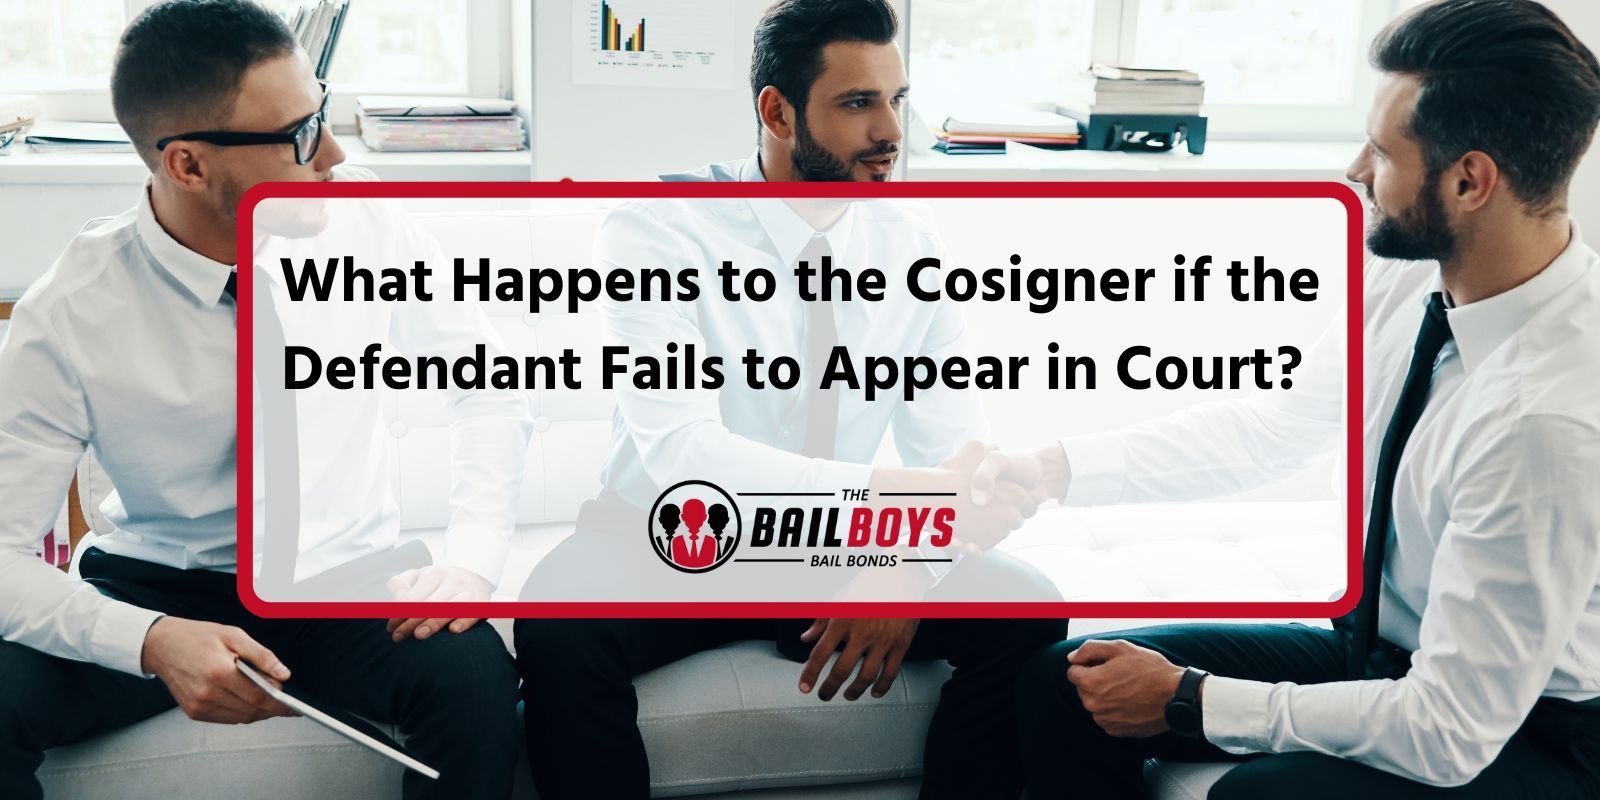 What Happens to the Cosigner If the Defendant Fails to Appear in Court?